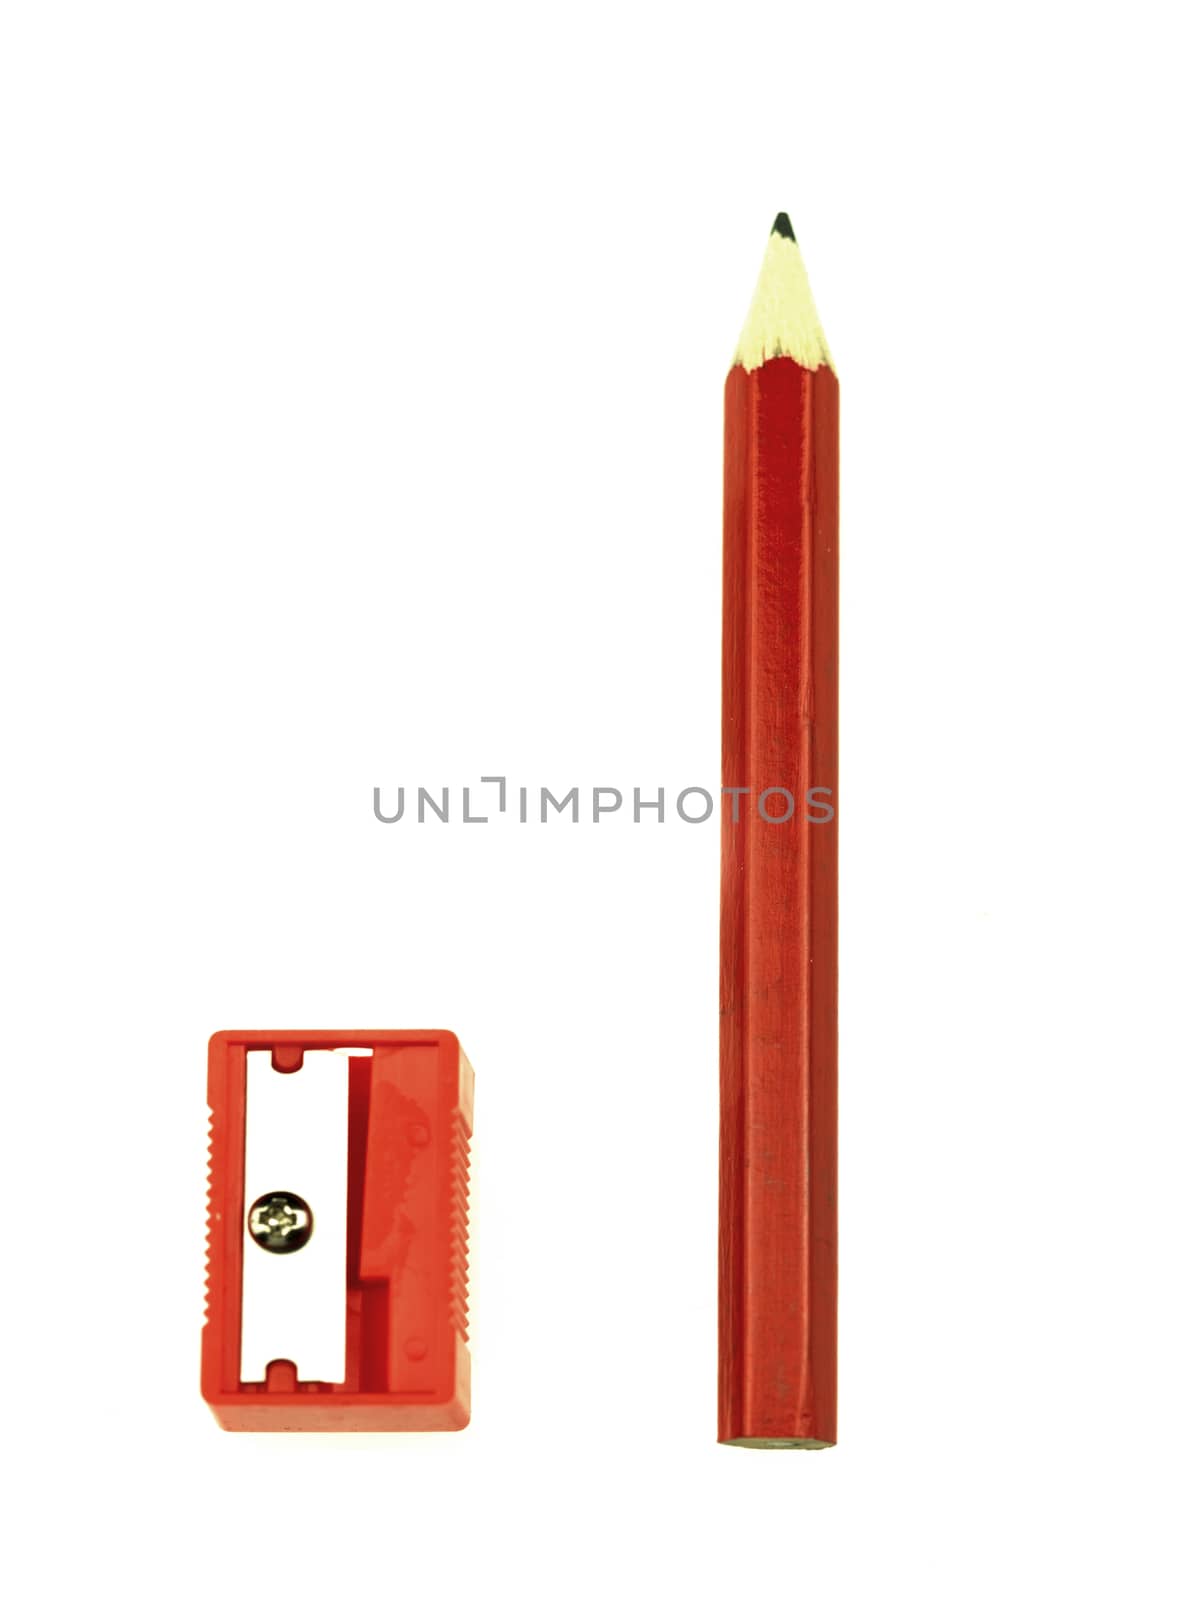 Childrens Pencil and sharpener Stationery by Whiteboxmedia